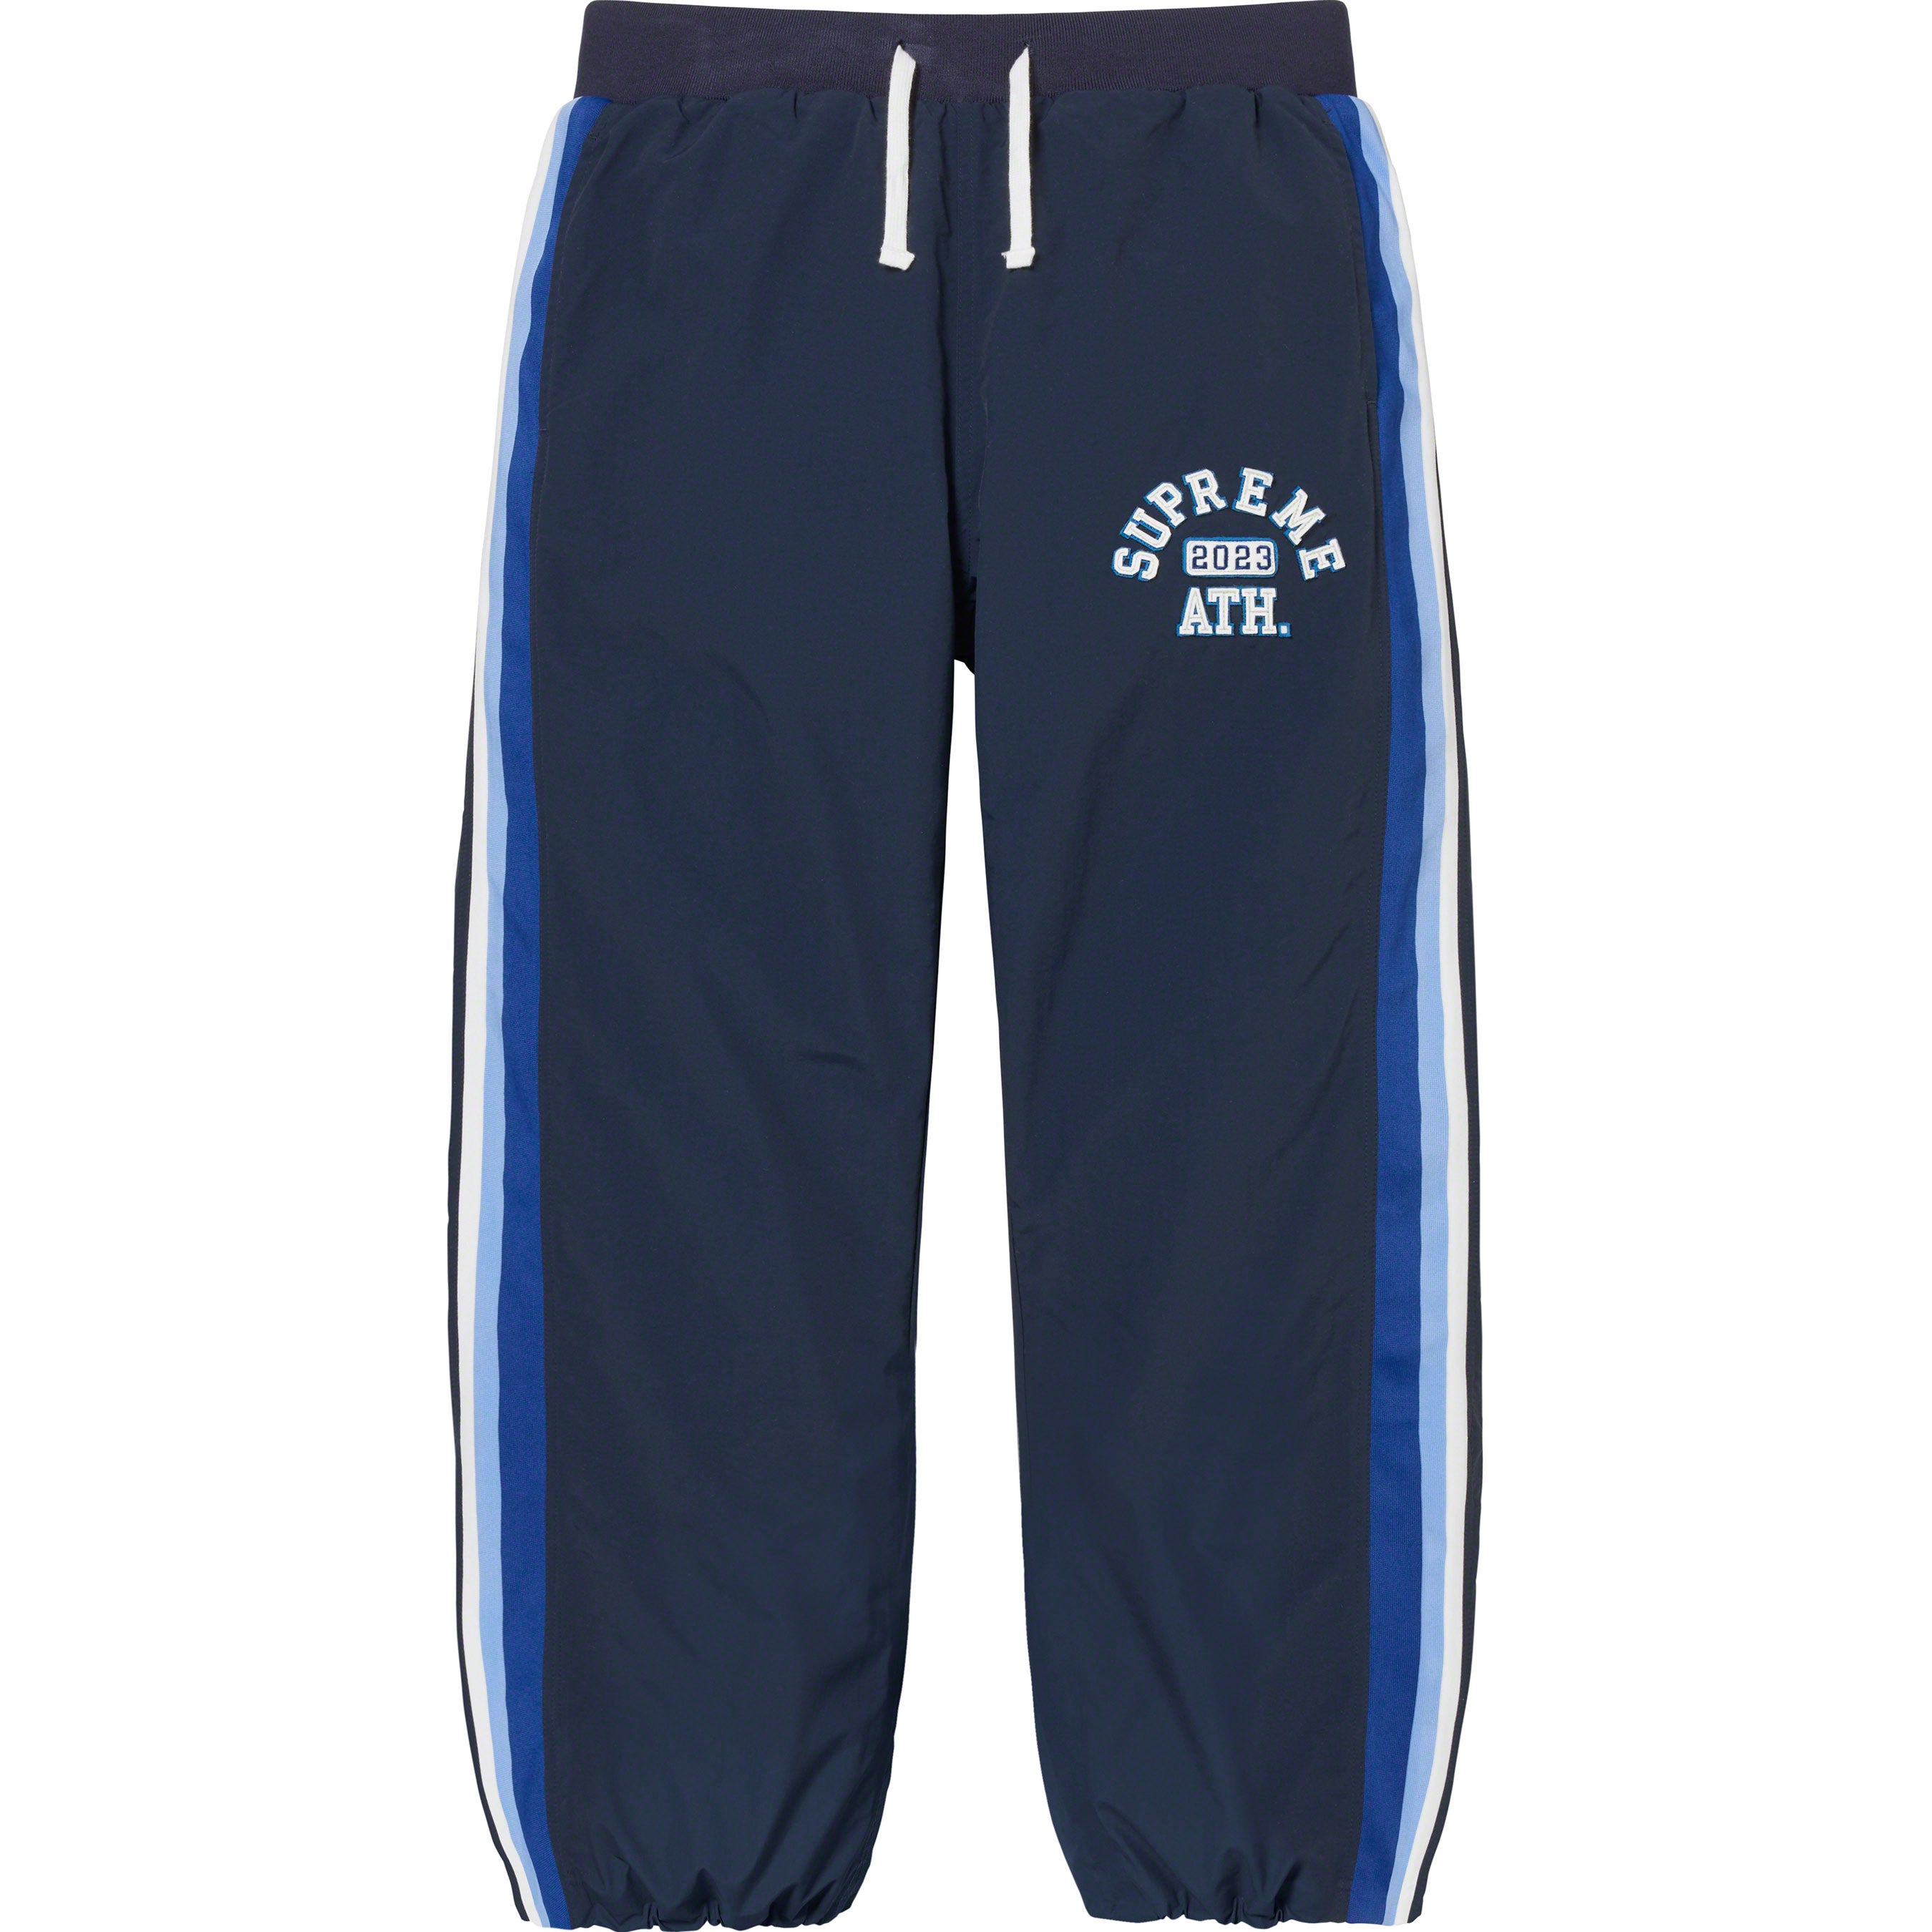 Jockey Blue Cotton Trackpants - Buy Jockey Blue Cotton Trackpants Online at  Best Prices in India on Snapdeal